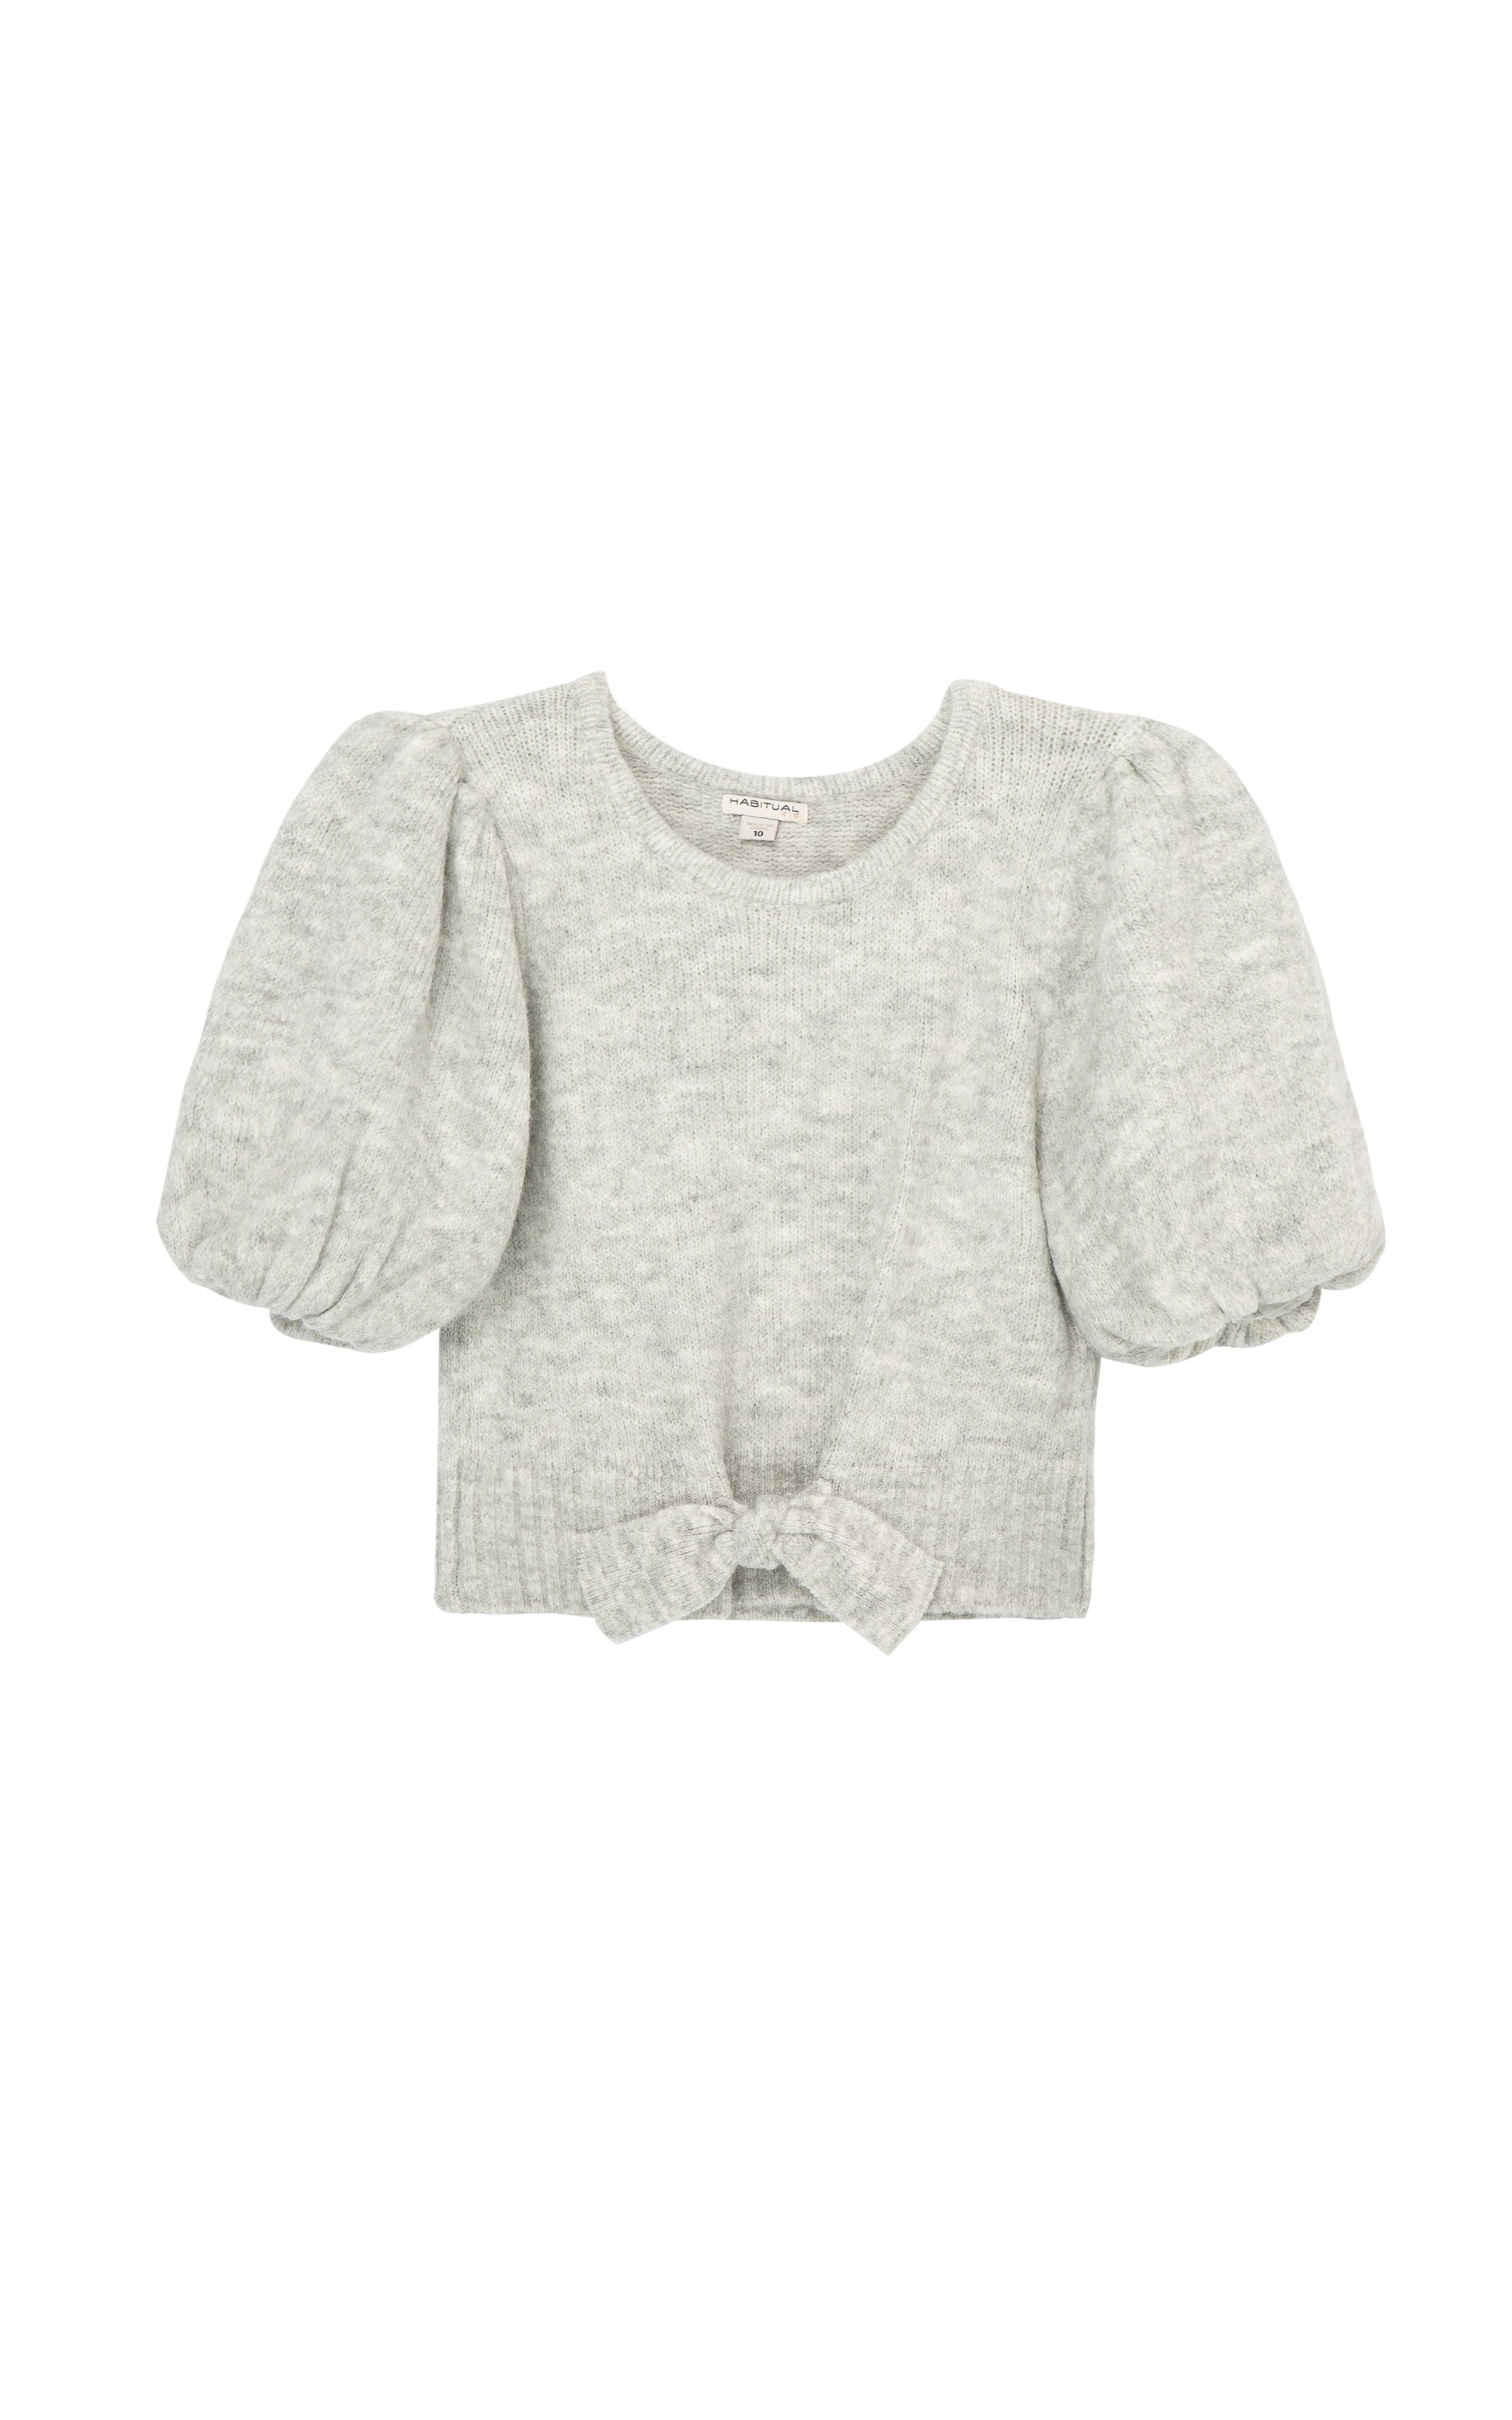 LIGHT GREY PUFF SLEEVE SWEATER WITH TIE FRONT